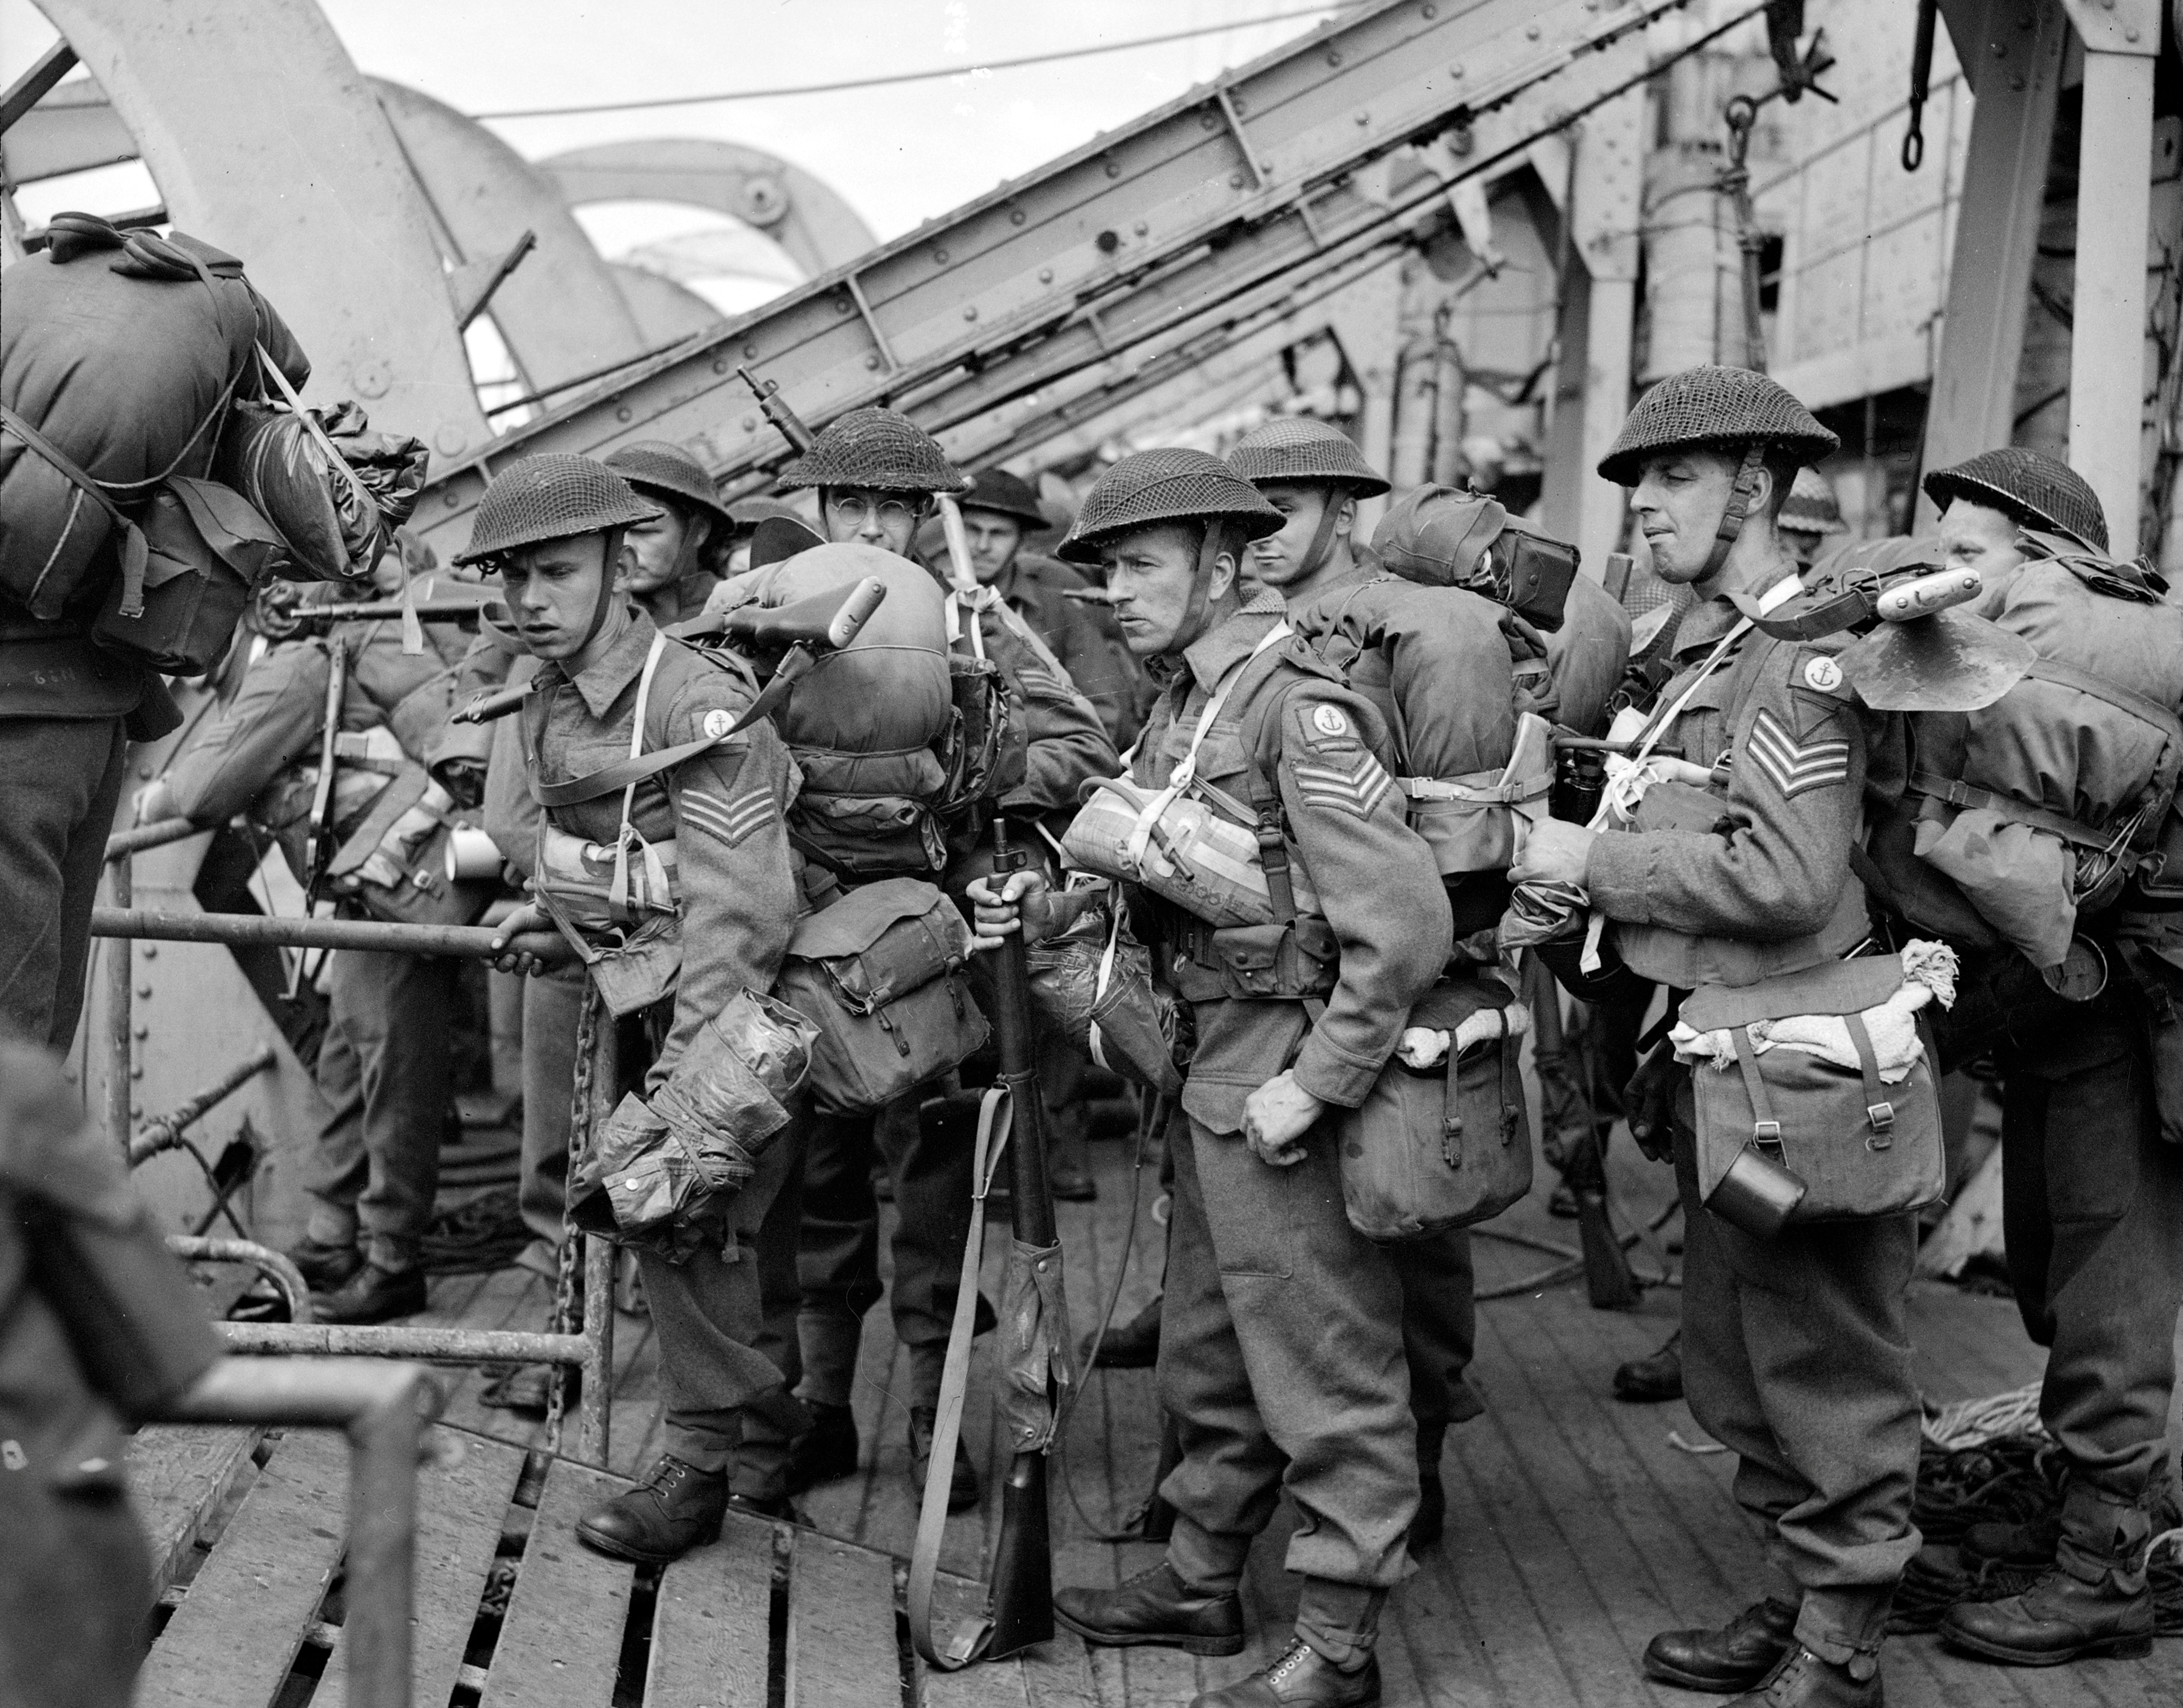 British troops disembark from the Canadian navy infantry landing ship HMCS Prince David on D-Day in Normandy